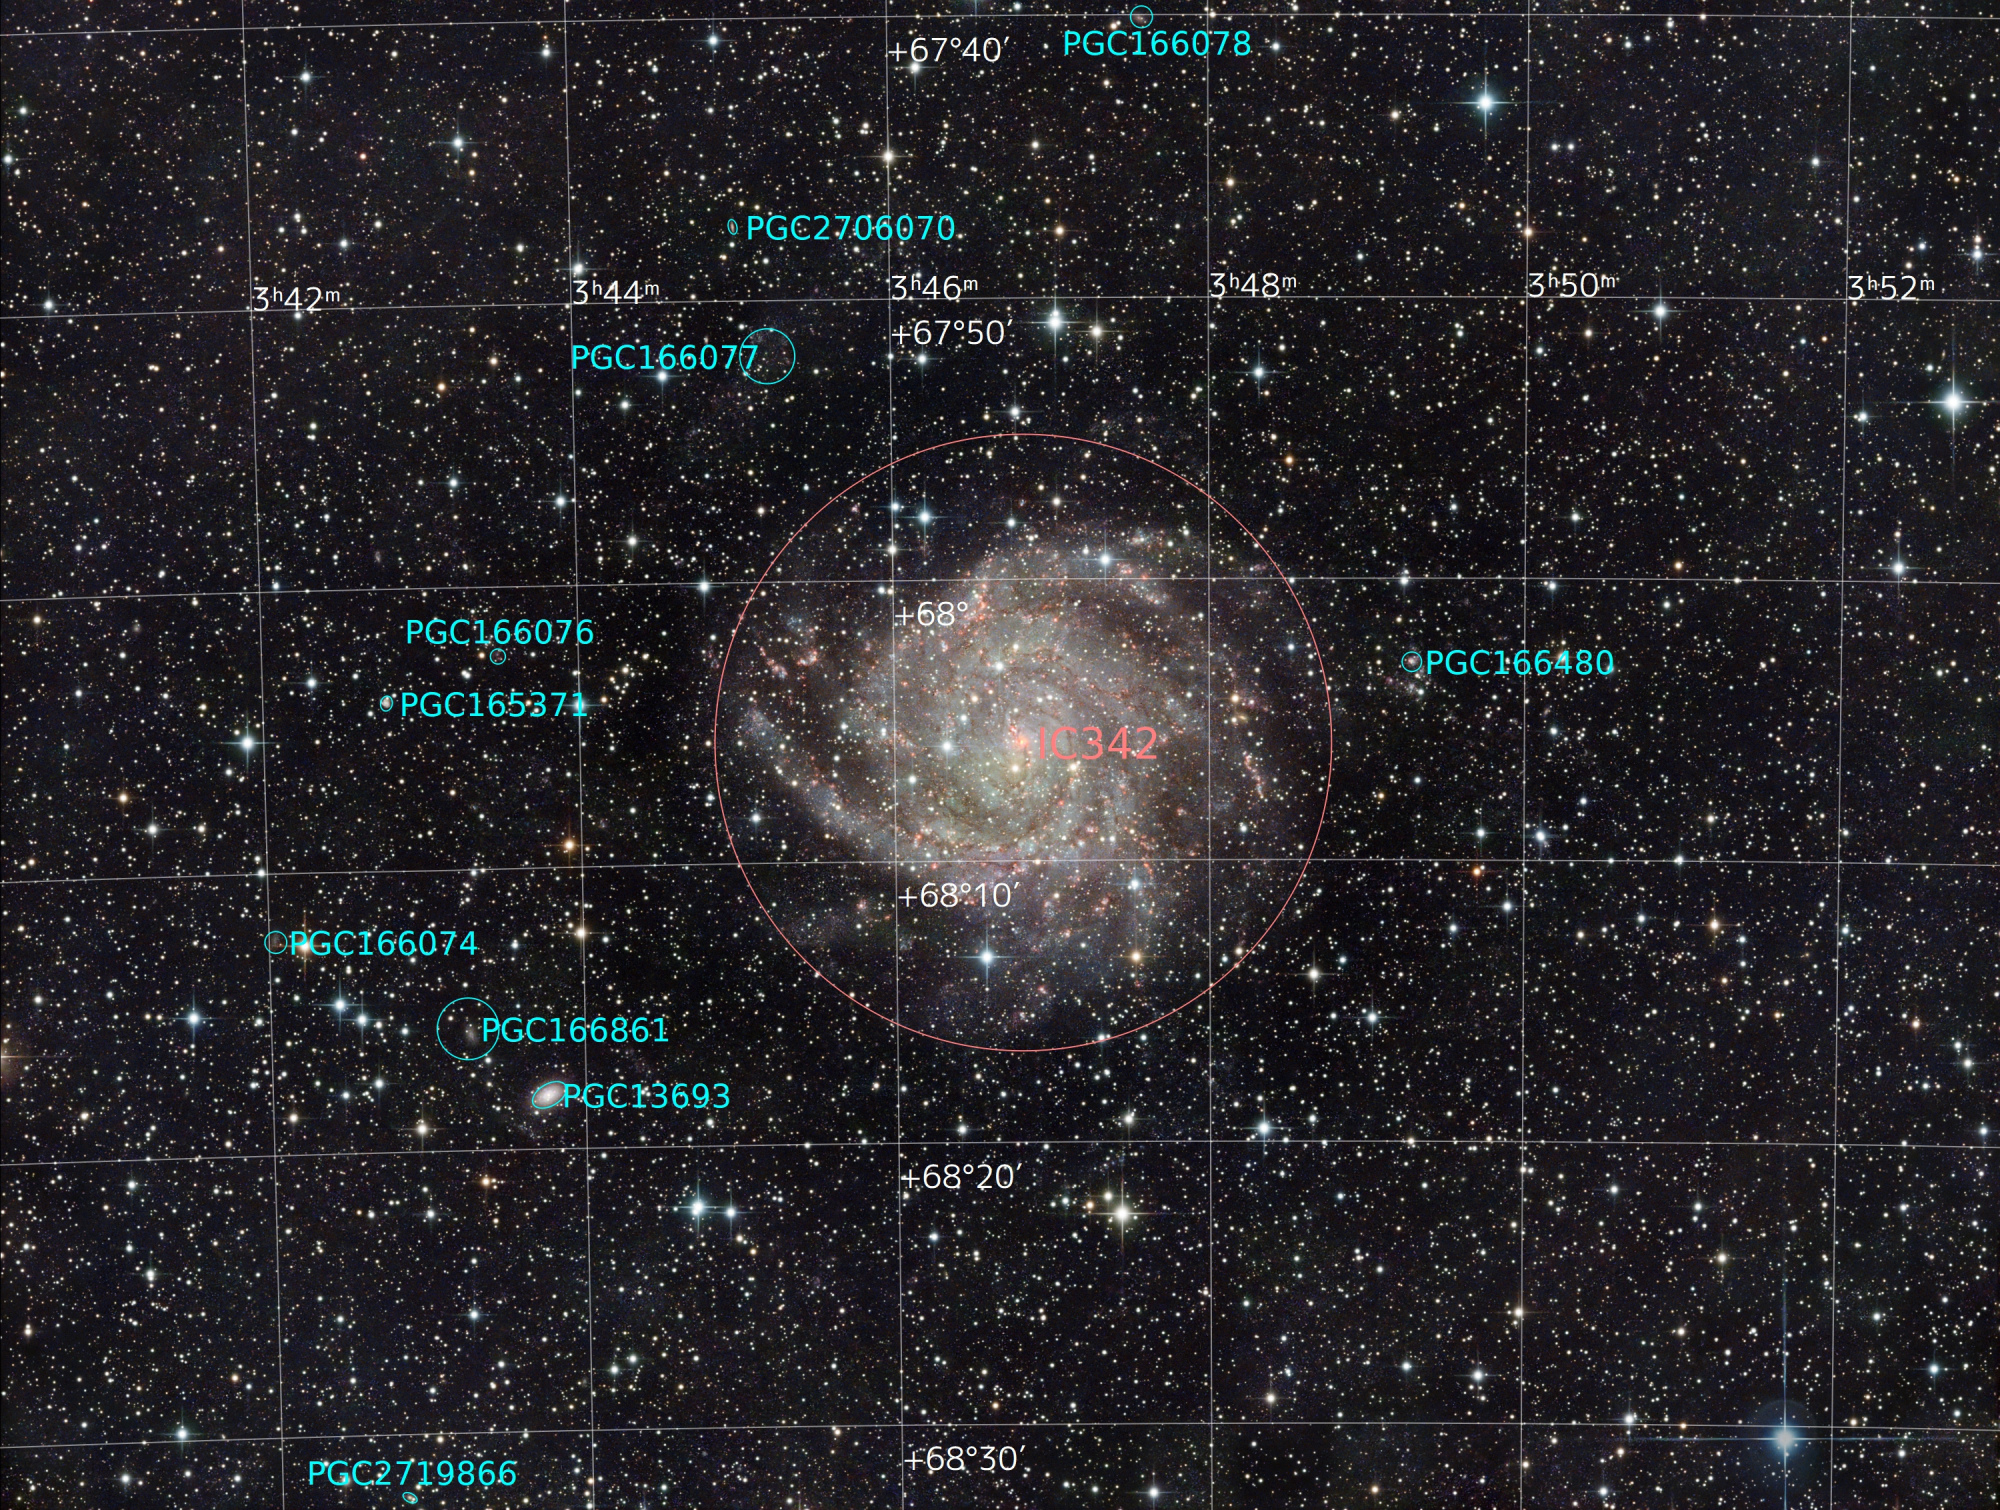 IC342_Assemblage_Stars_Starless_NoiseXT_Coul_Reduit_Annotated.thumb.jpg.6f201aa7349bf581c6defc62e81cff10.jpg